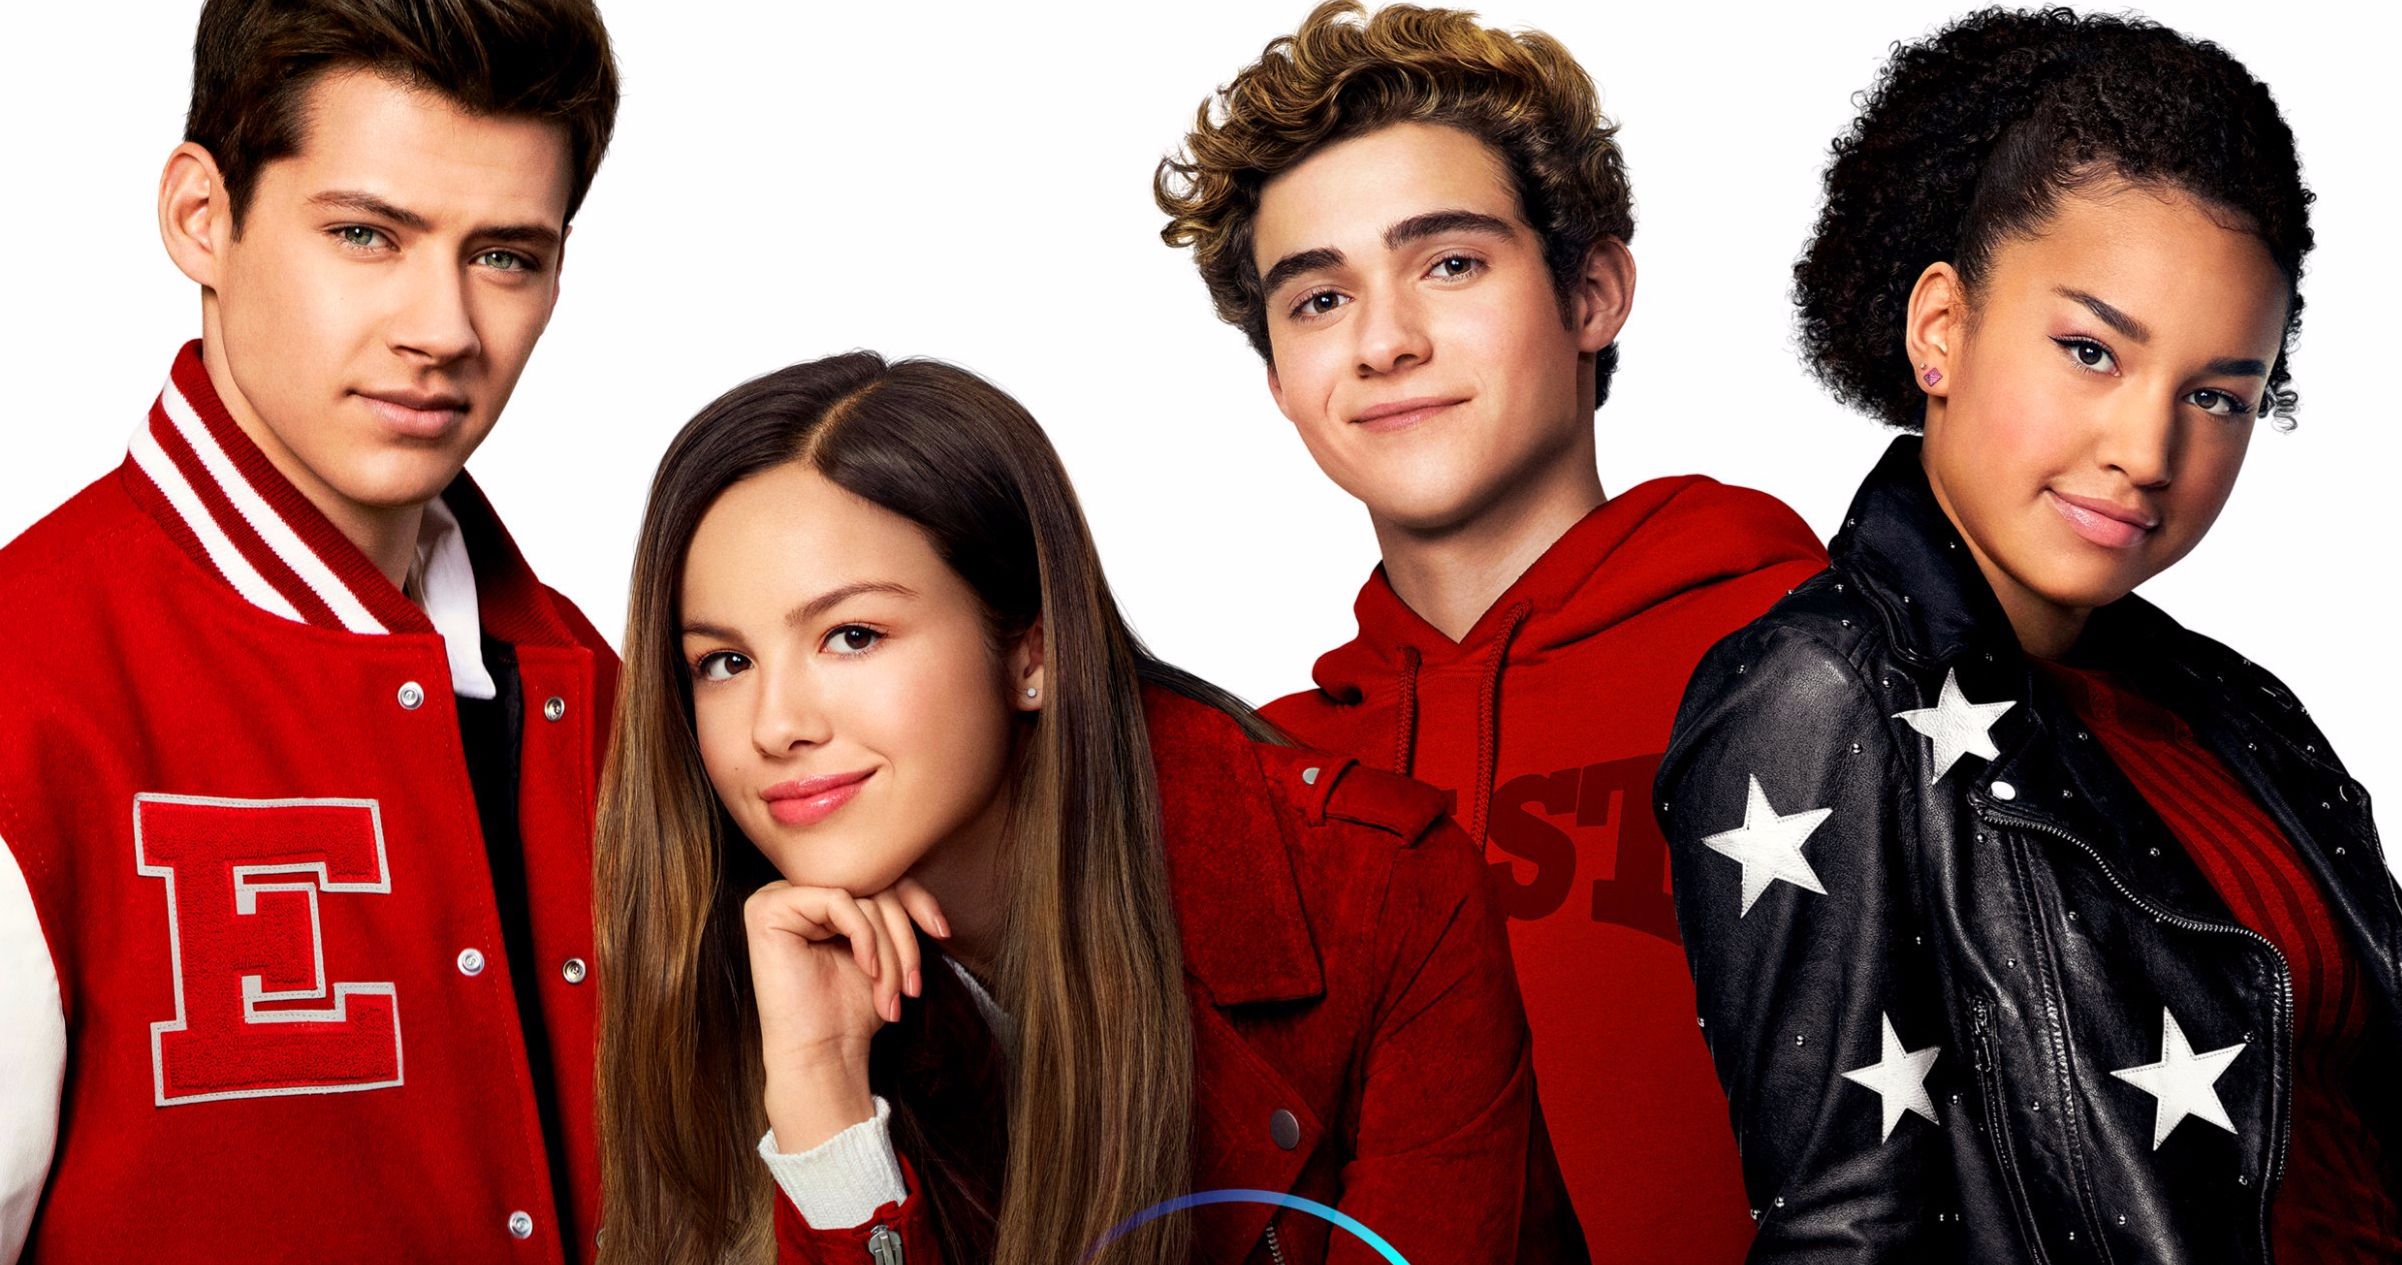 High School Musical: The Musical: The Series Poster Brings The New Cast Together